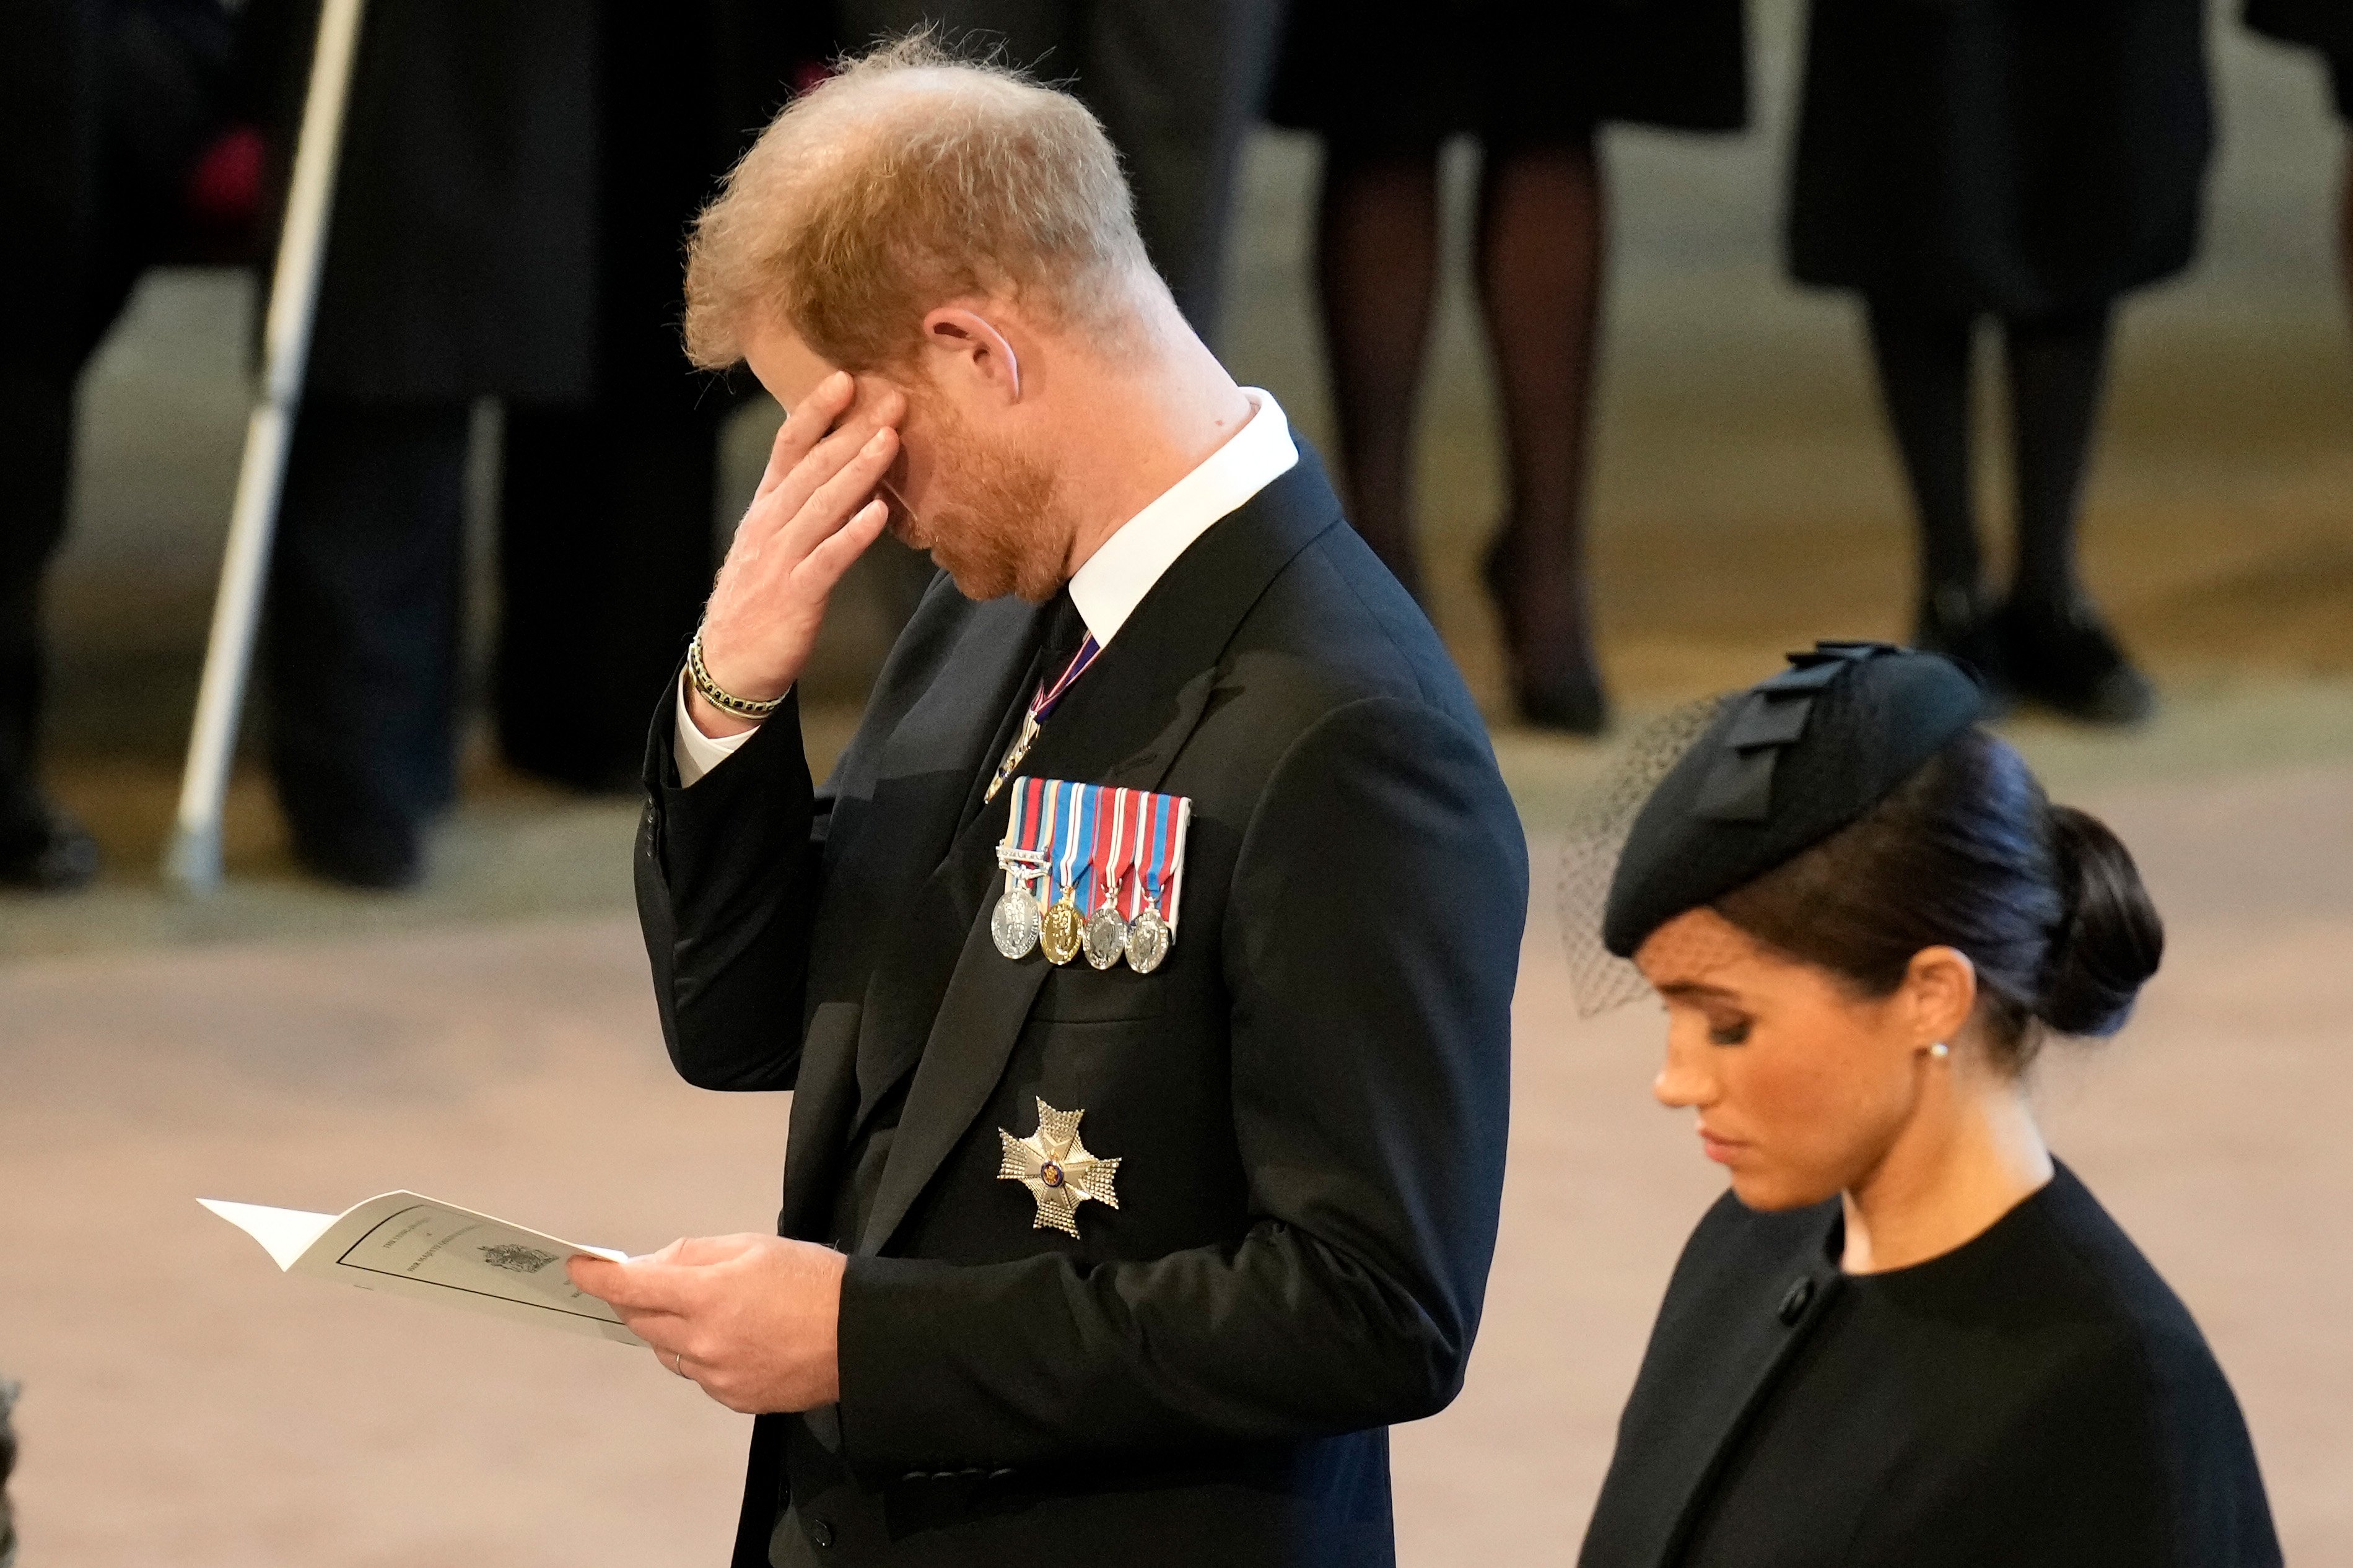 Prince Harry, Duke of Sussex, and Meghan, Duchess of Sussex pay their respects in The Palace of Westminster on September 14, 2022, in London, England. | Source: Getty Images